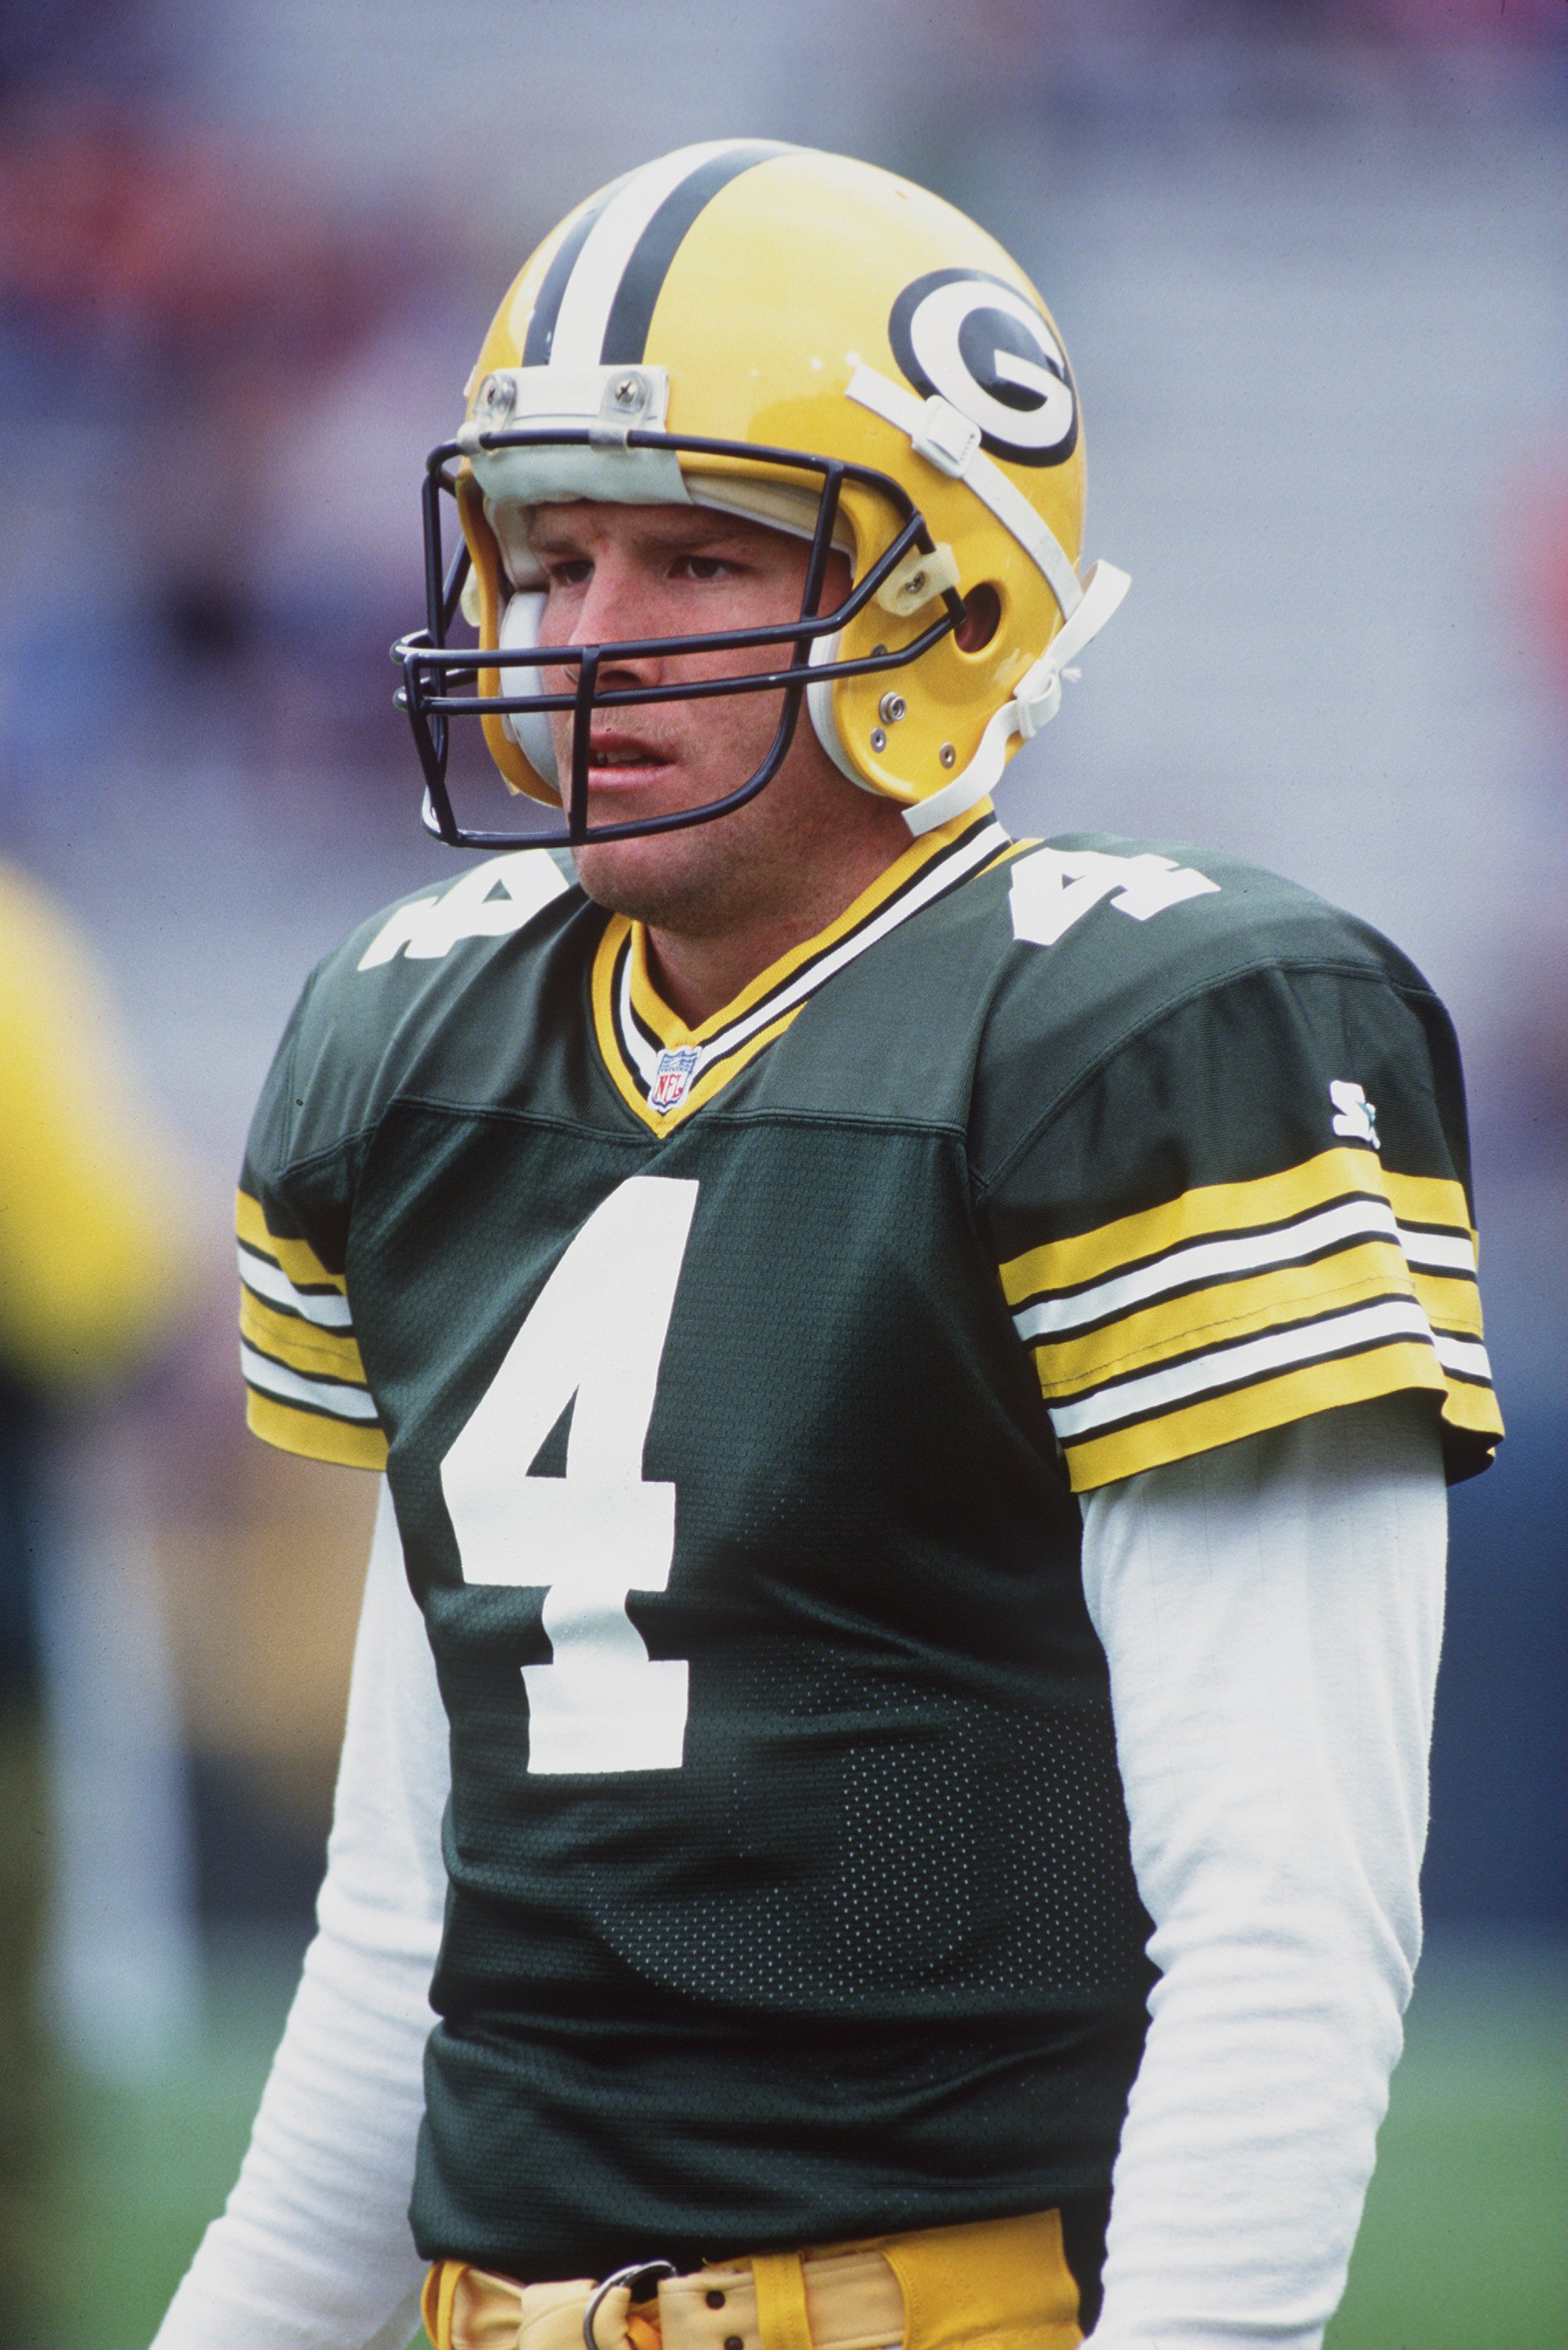 How old is brett favre from the green bay packers How We Should Remember Brett Favre Things You May Not Know About Him Bleacher Report Latest News Videos And Highlights